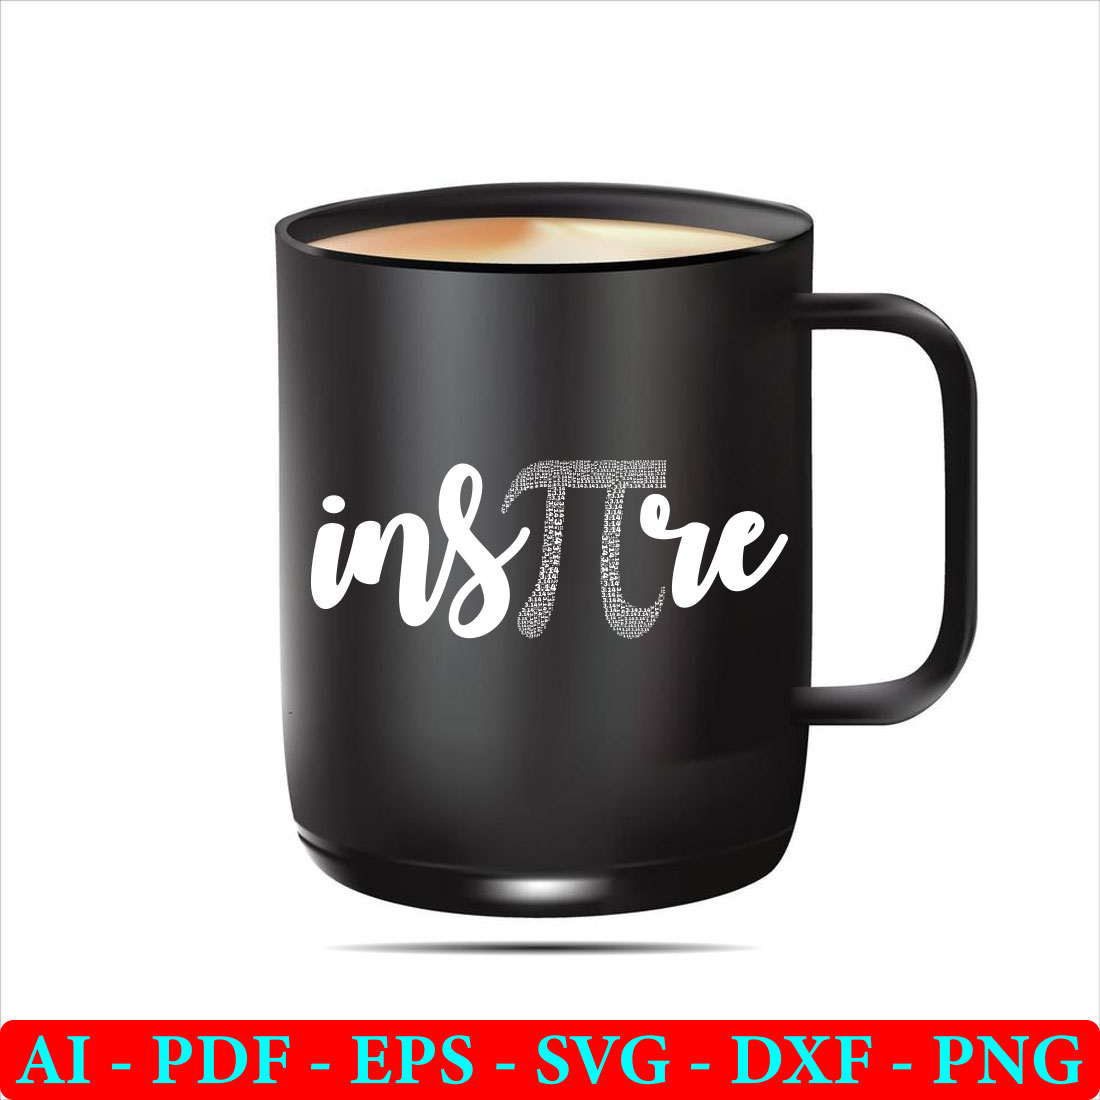 Black coffee mug with the words instre on it.